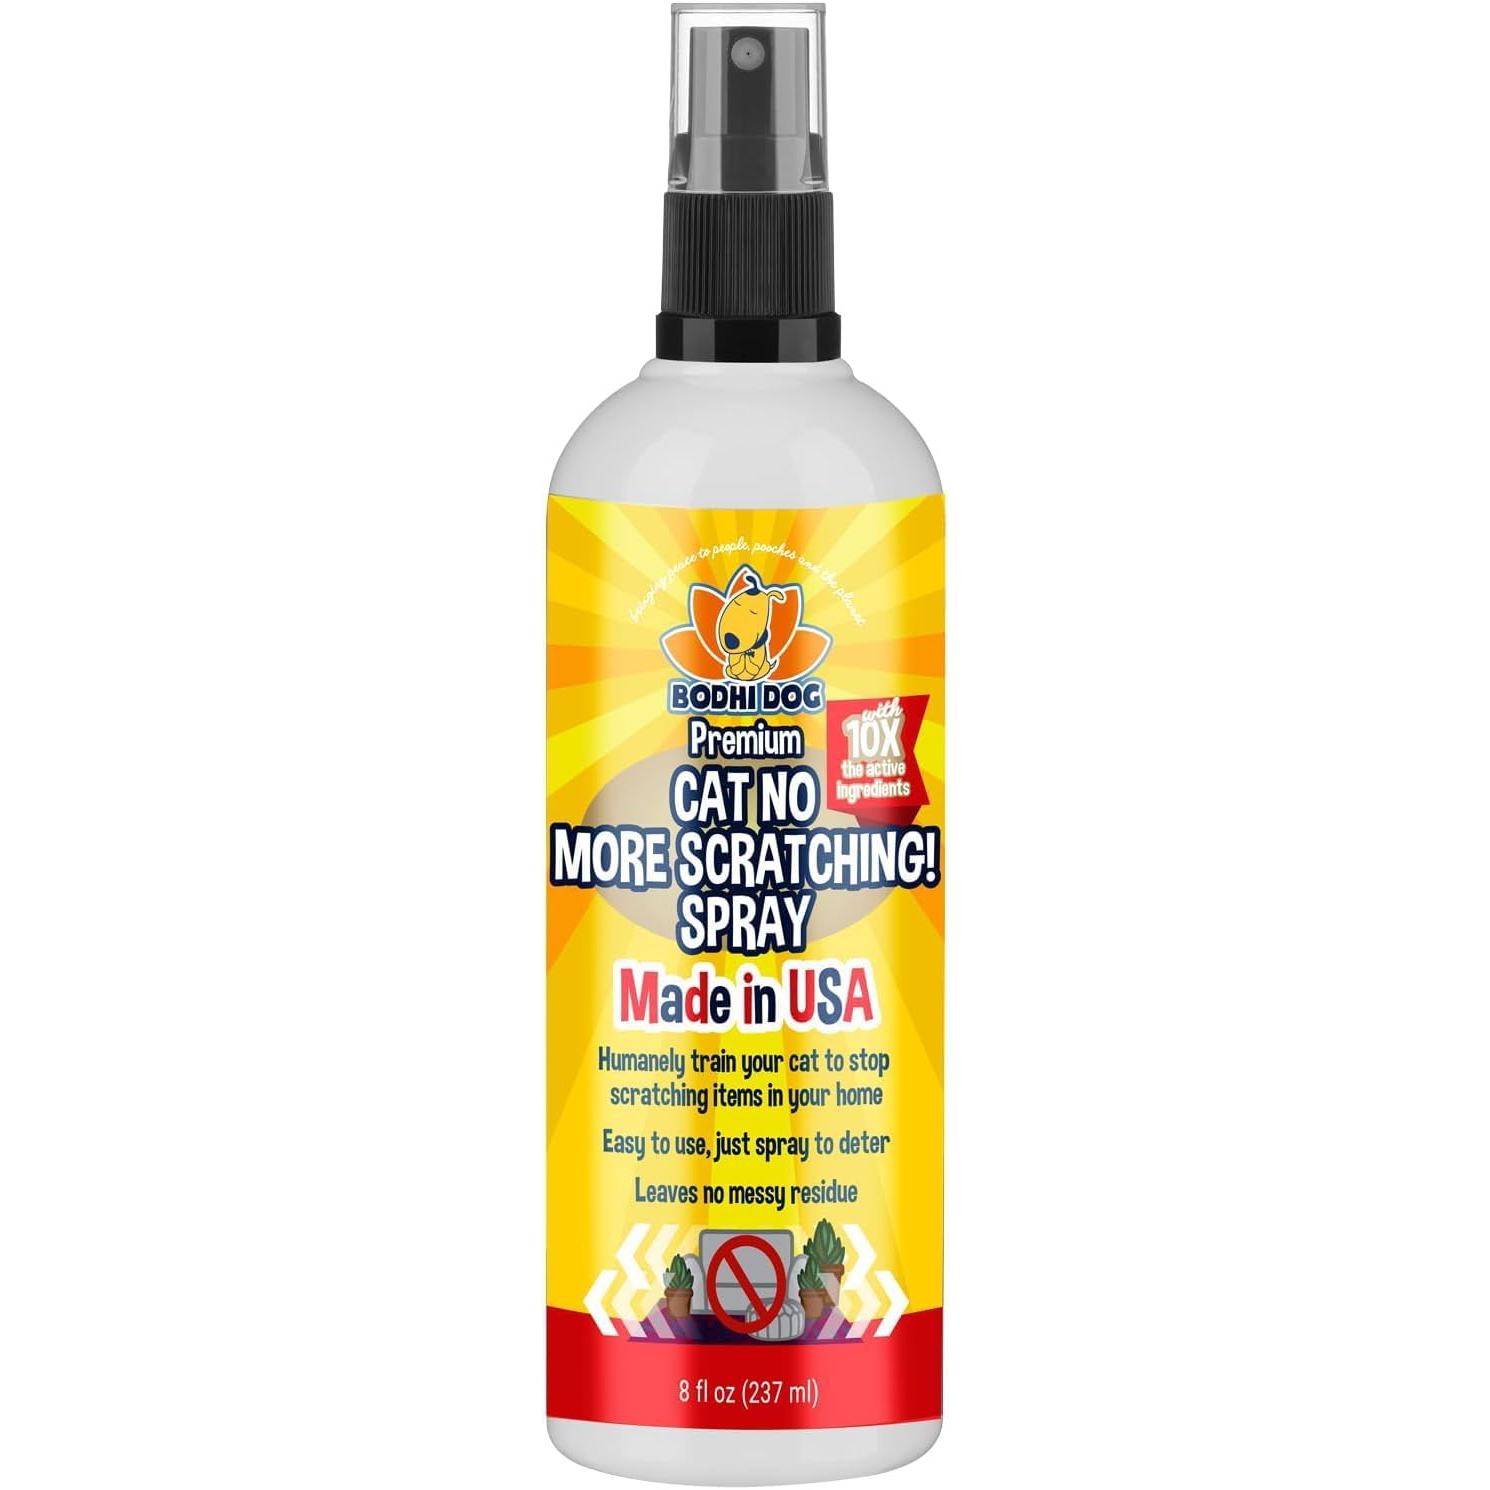 Bodhi Dog Cat No More Scratching! Spray Cat Deterrent Spray for Indoor & Outdoor Use Safe Training Cat Scratch Spray with Essential Oils Cat Scratch Deterrent for Furniture Made in USA new